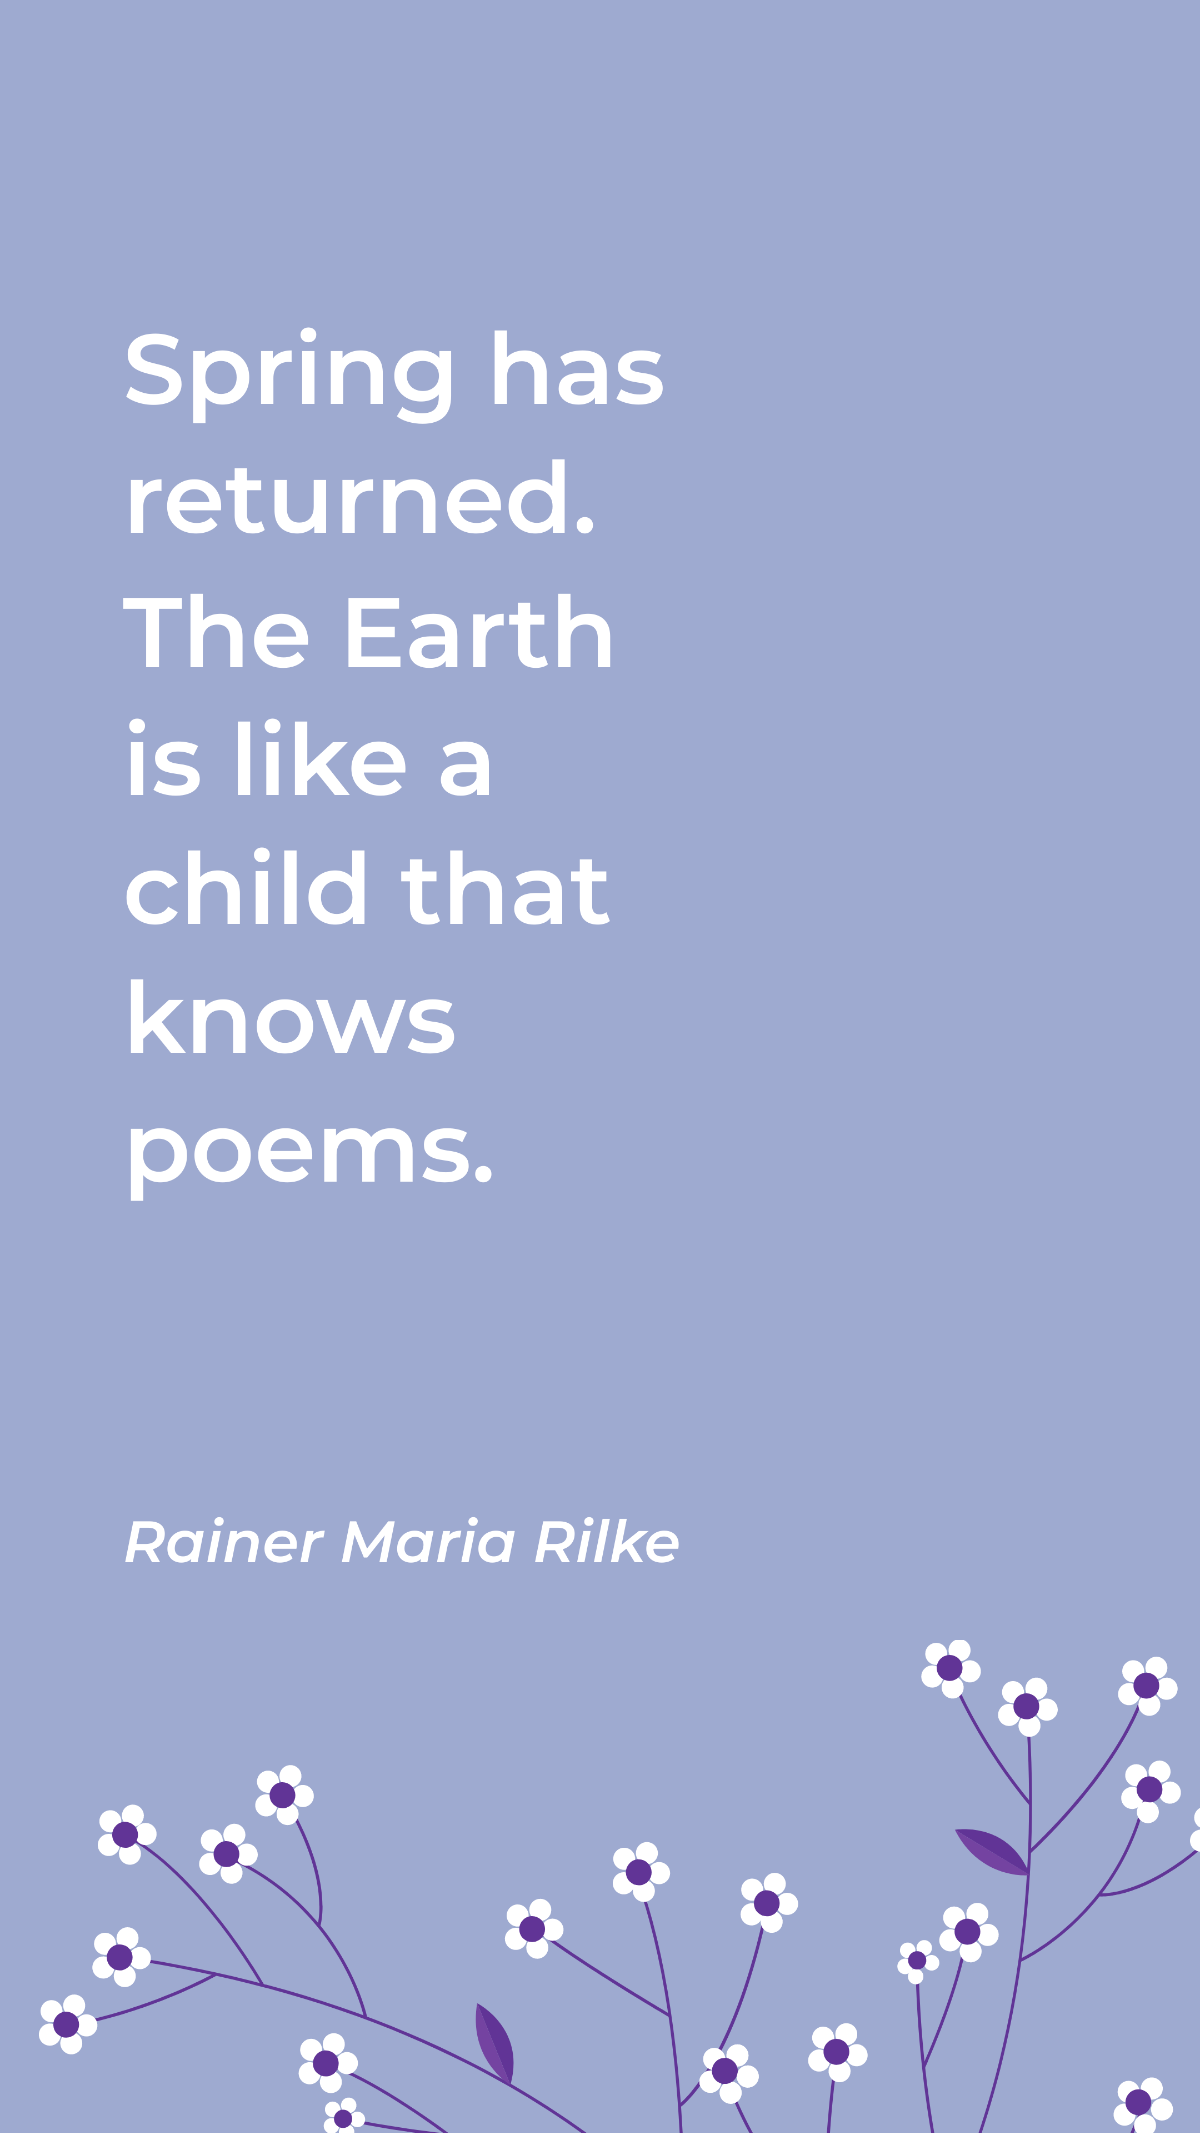 Rainer Maria Rilke - Spring has returned. The Earth is like a child that knows poems.